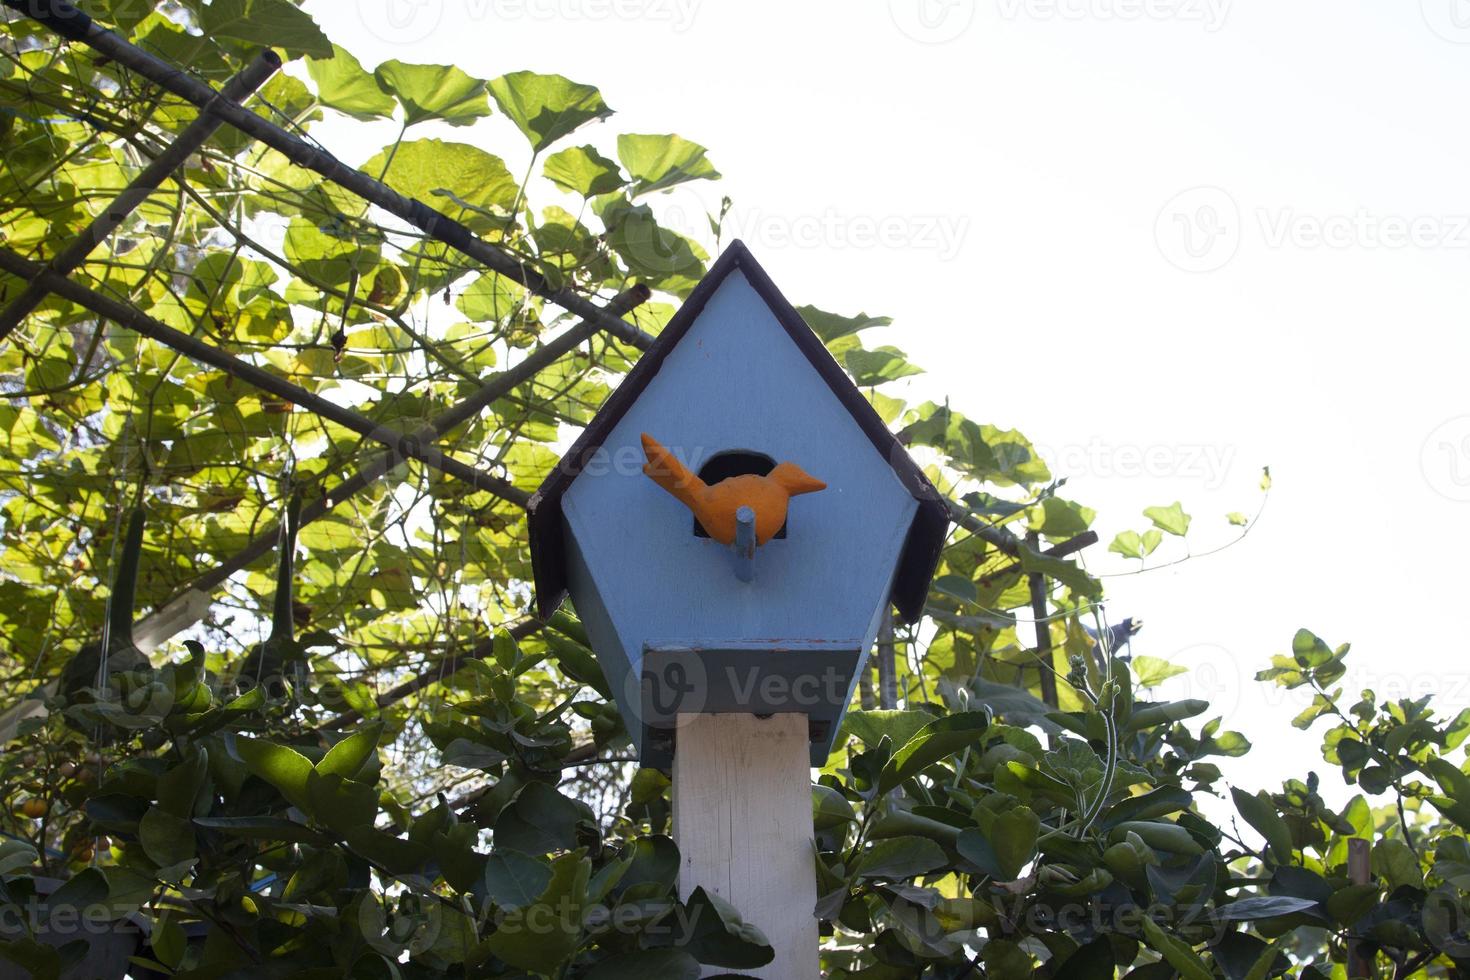 Bird House is a man-made bird house for birds to live in and symbolizes the birds living in the farmer's garden, built and modeled to resemble the nature that allows birds to live, build nests photo